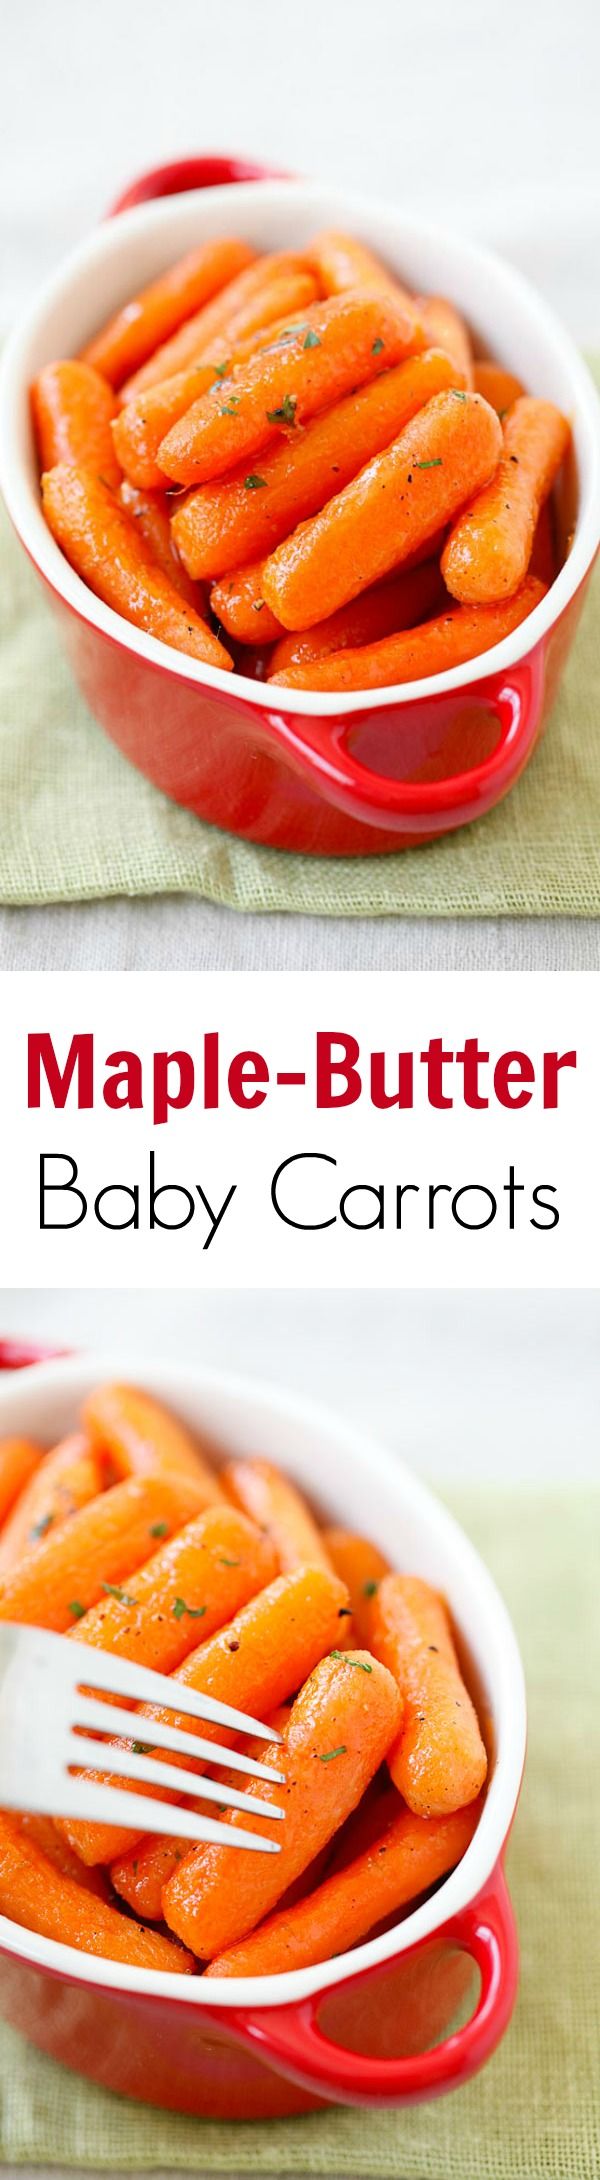 Maple-butter roasted baby carrots - tender and soft carrots roasted with sweet maple-butter. Great and healthy side dish for the entire family!! | rasamalaysia.com